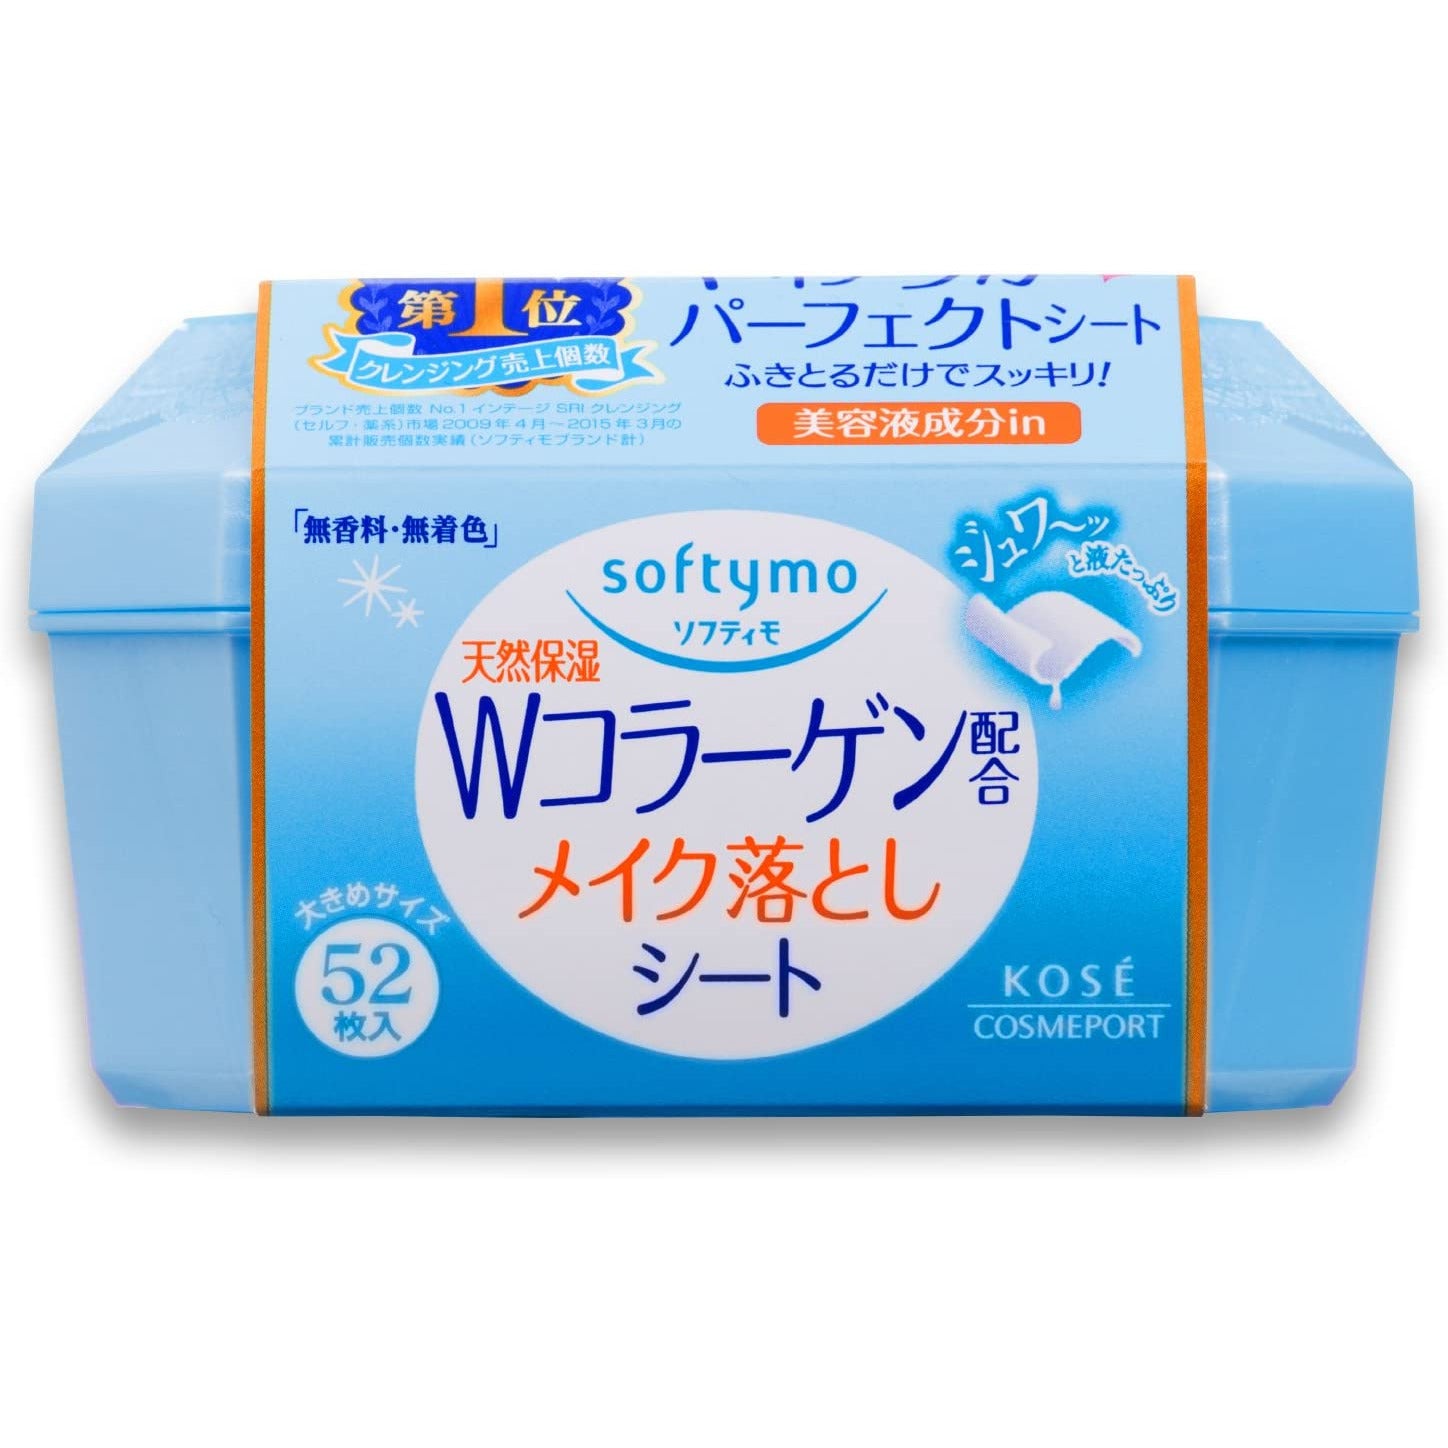 Kose Softymo makeup remover sheet (C) b (with collagen) 52 sheets